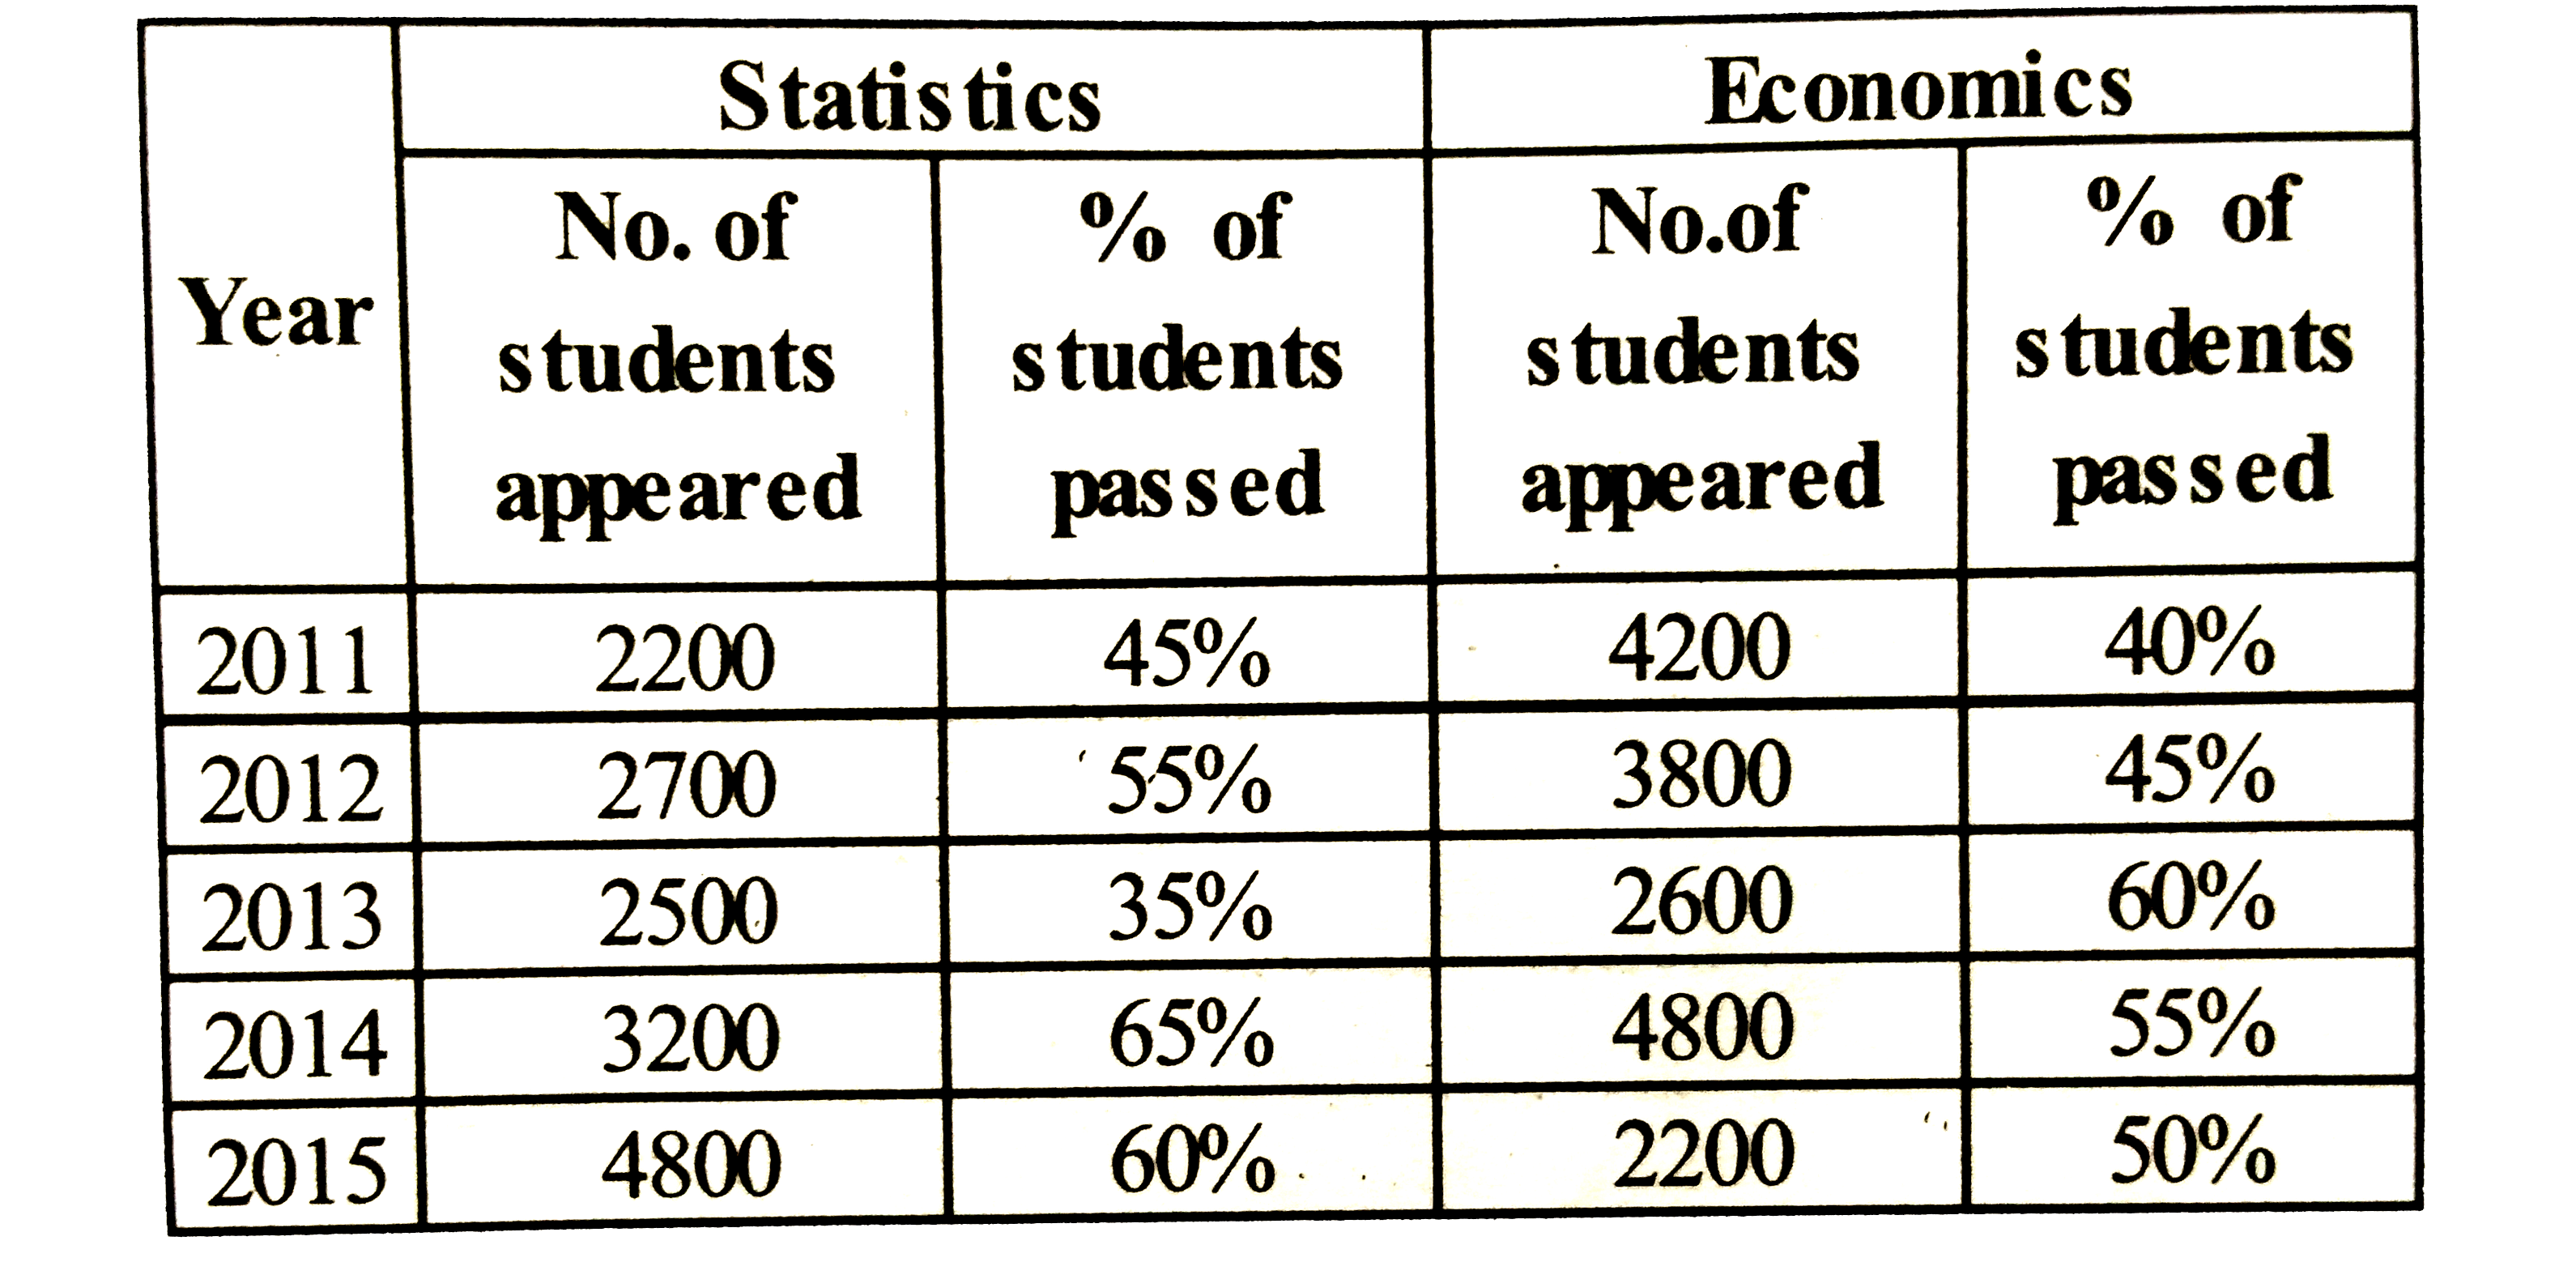 No. of students and % of students passed out of those who appeared are given for two subjects from year 2011 to 2015 in a college XYZ.      Find the difference between the total number of studetns passed in Statistics in year 2012 and total number of students failed in Economics is year 2015.